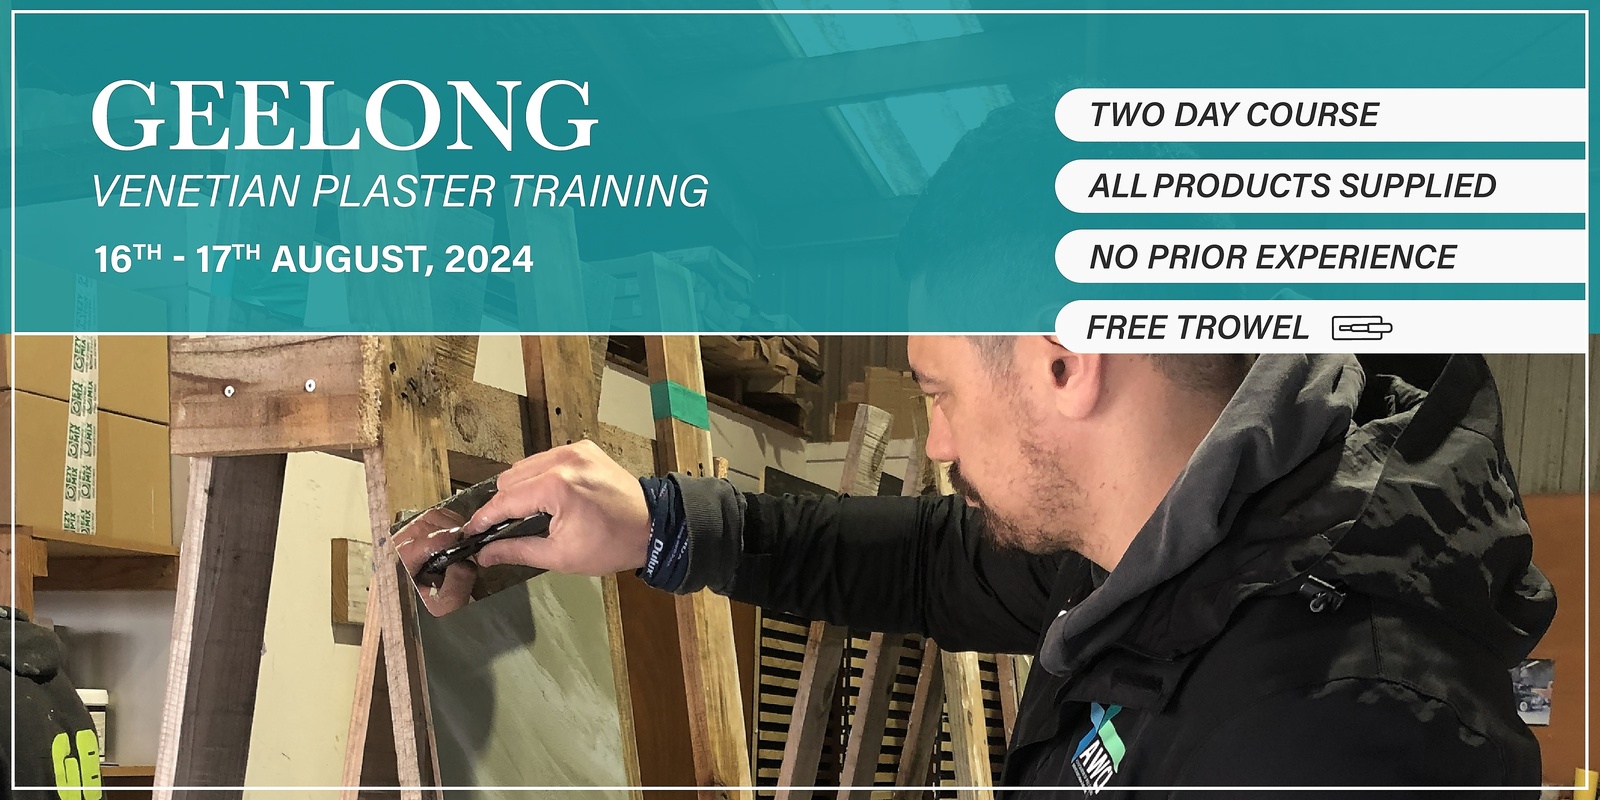 Banner image for Geelong Venetian Plaster Training - (16th - 17th August, 2024)